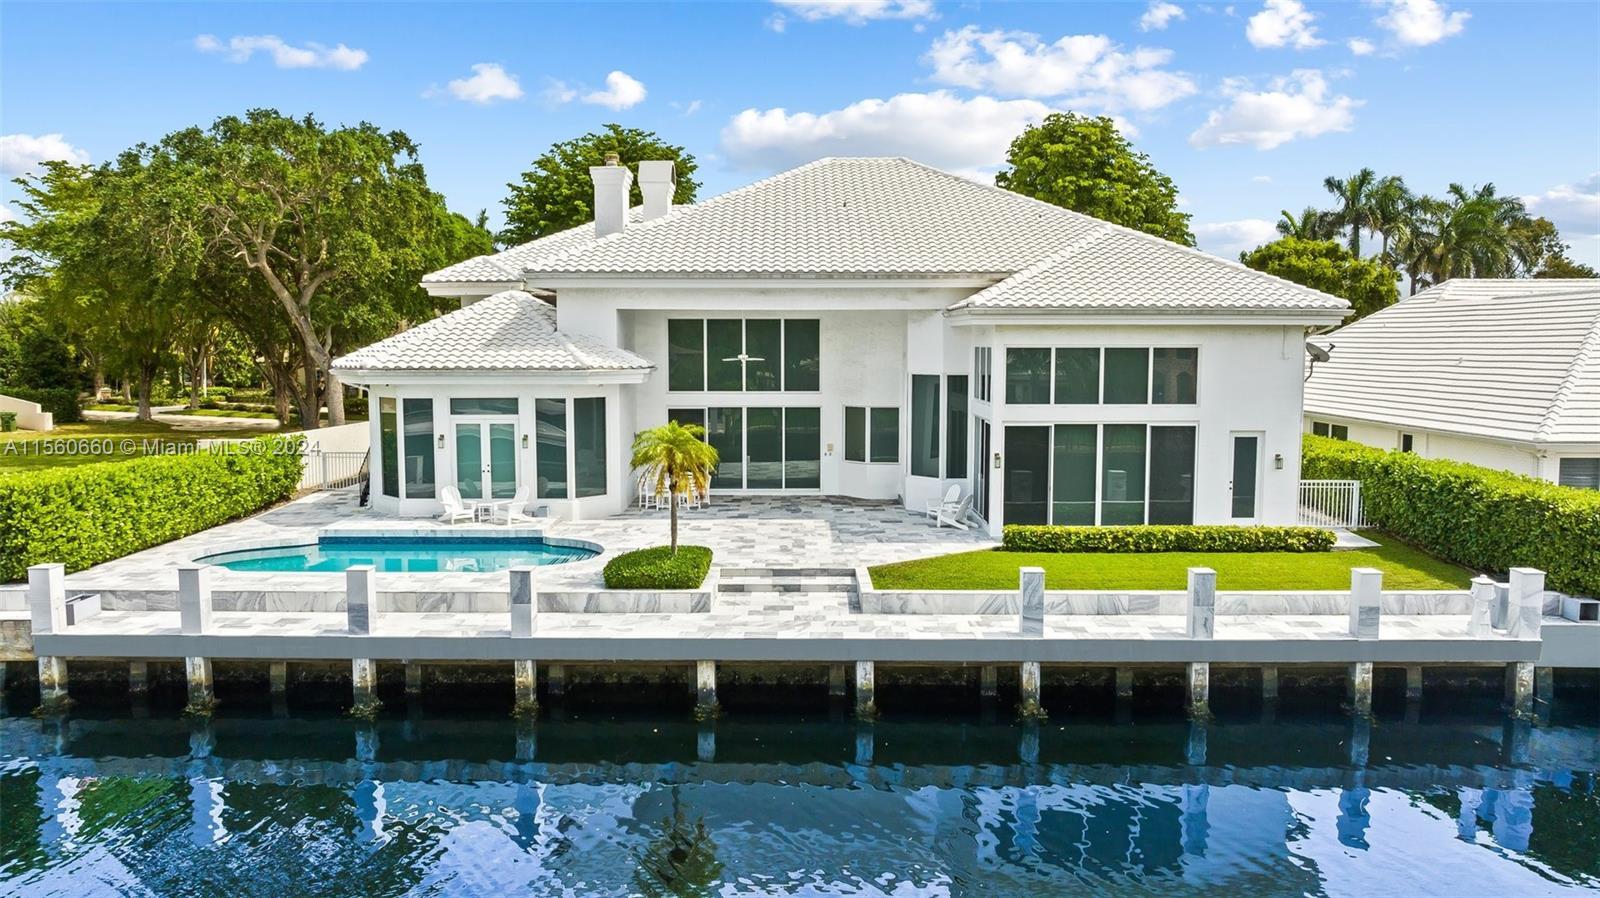 Luxury waterfront living awaits at 101 Bay Colony Dr. This expansive 7-bed, 8-bath estate spans 5,70